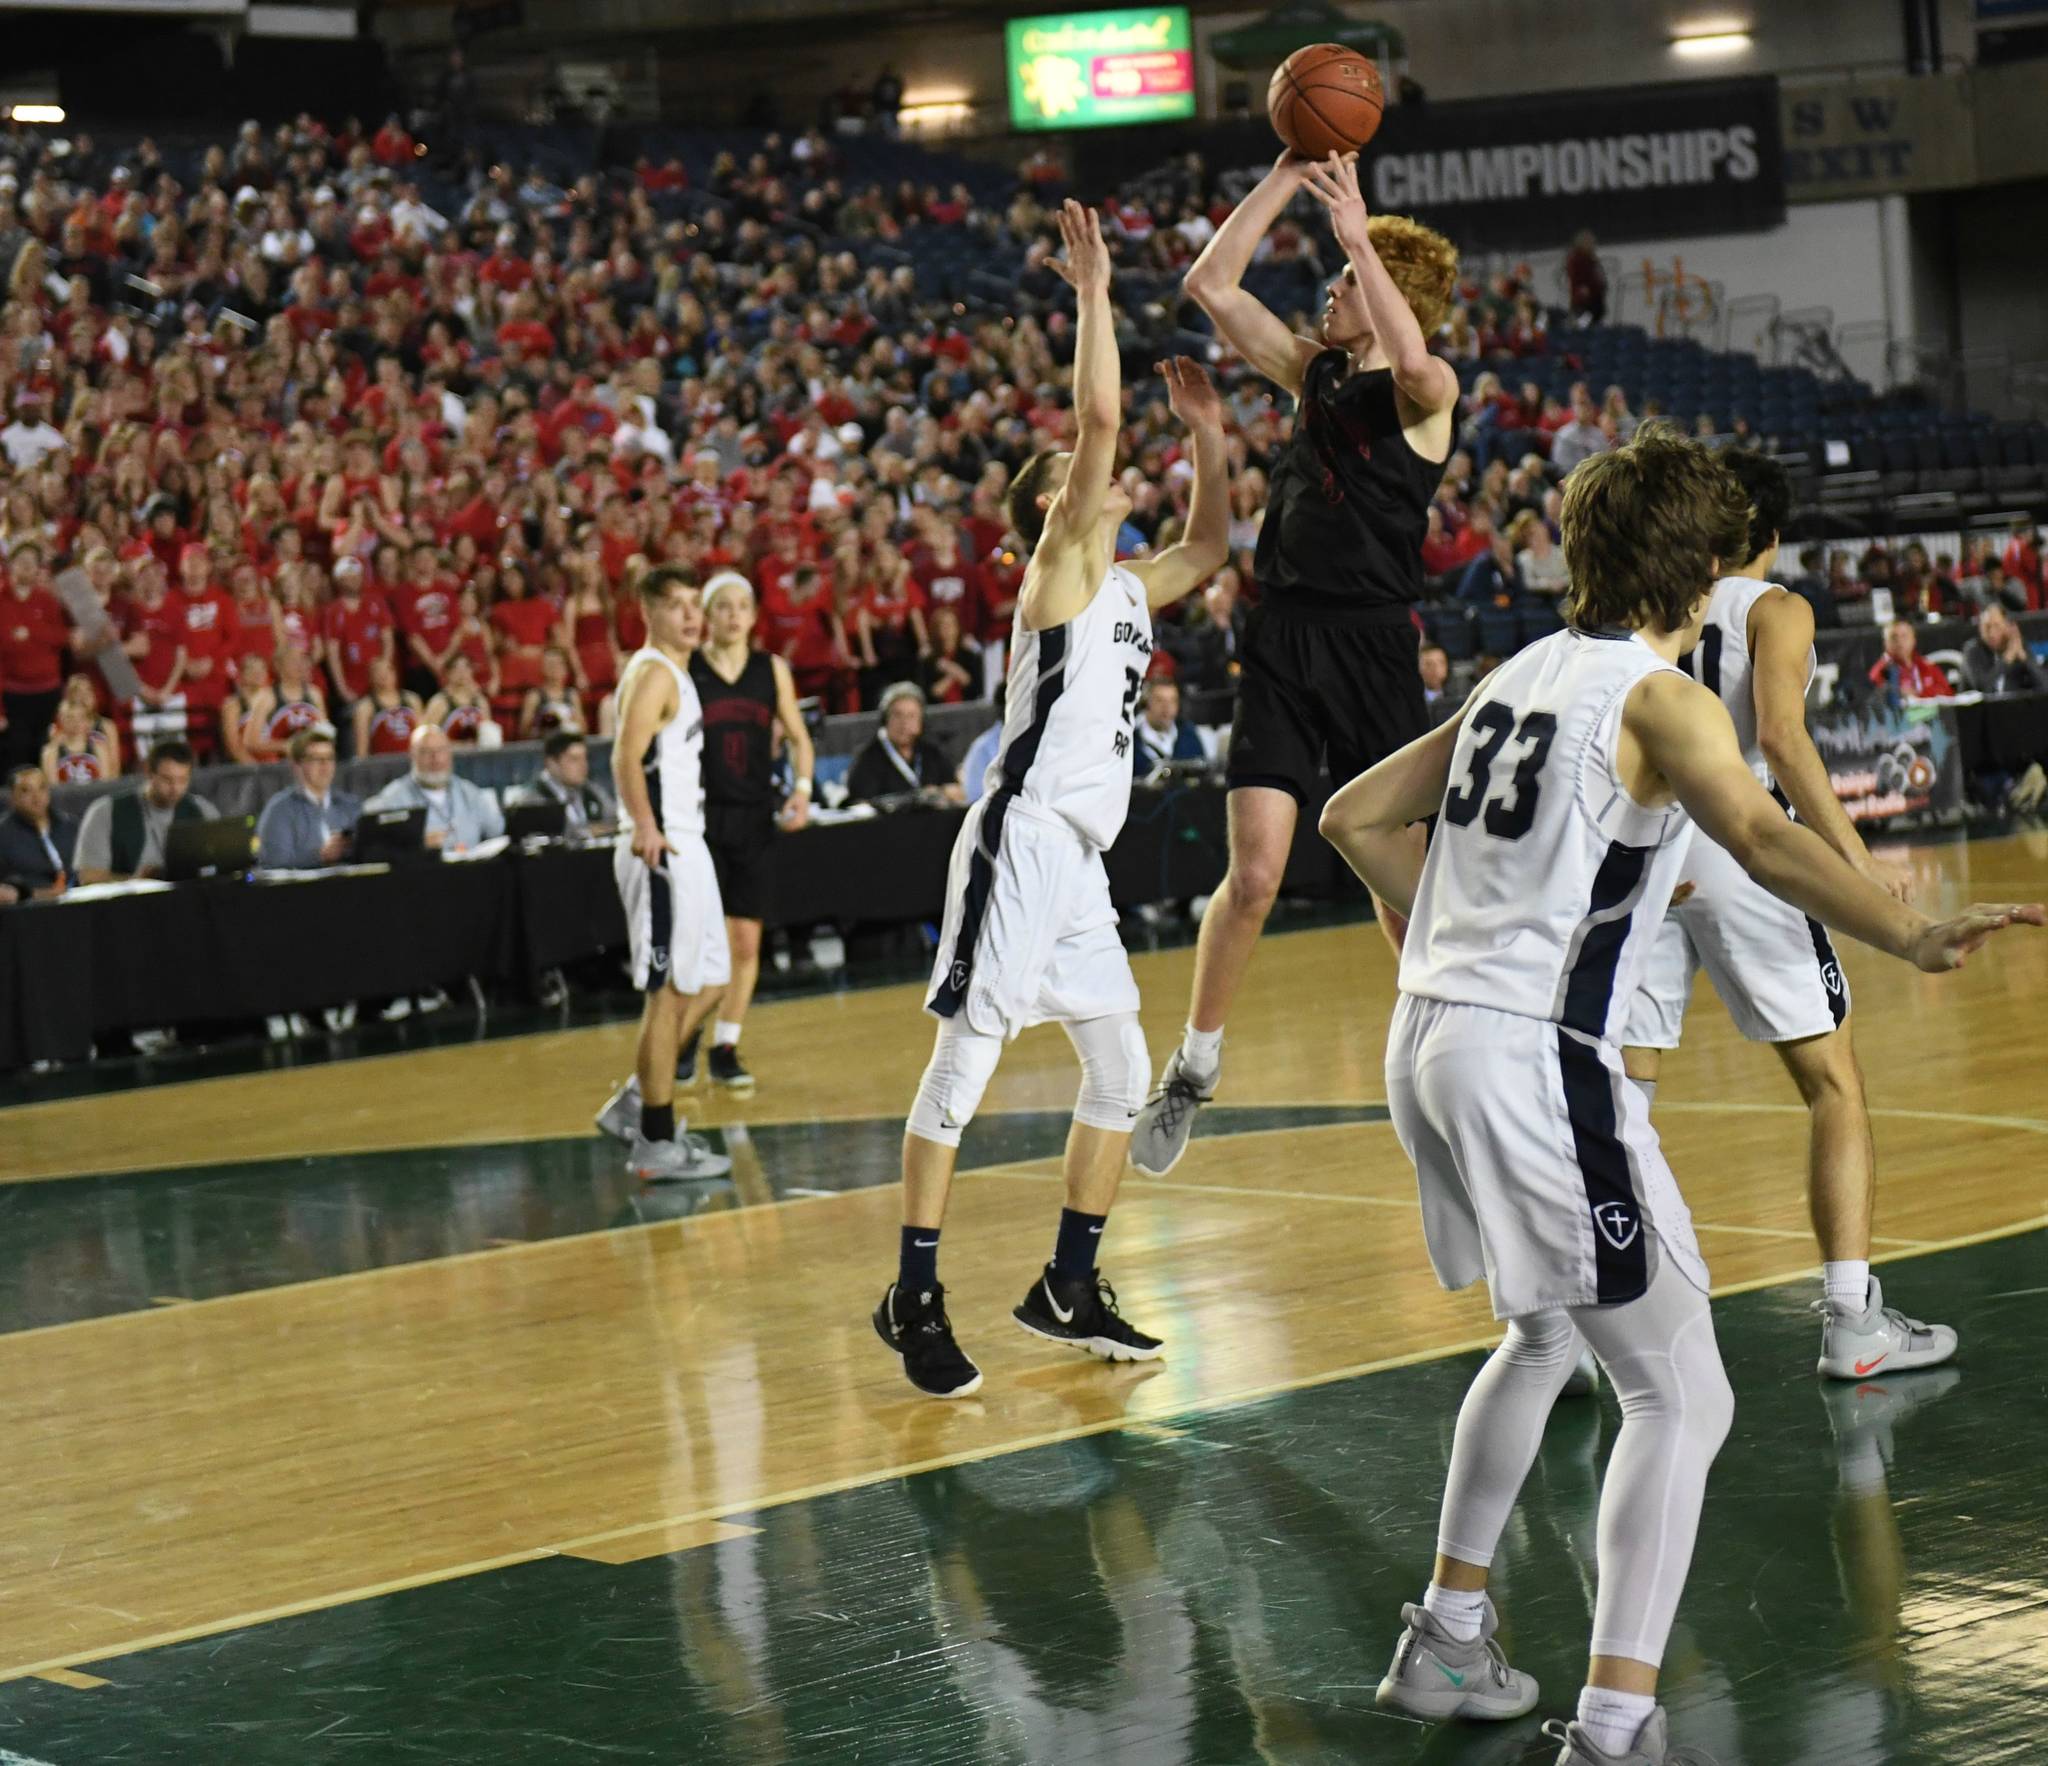 Mount Si’s Jabe Mullins unleashes a shot at the 4A state tournament with the Wildcat sea-of-red crowd to his side. He is the 4A KingCo most valuable player. Courtesy of Calder Productions